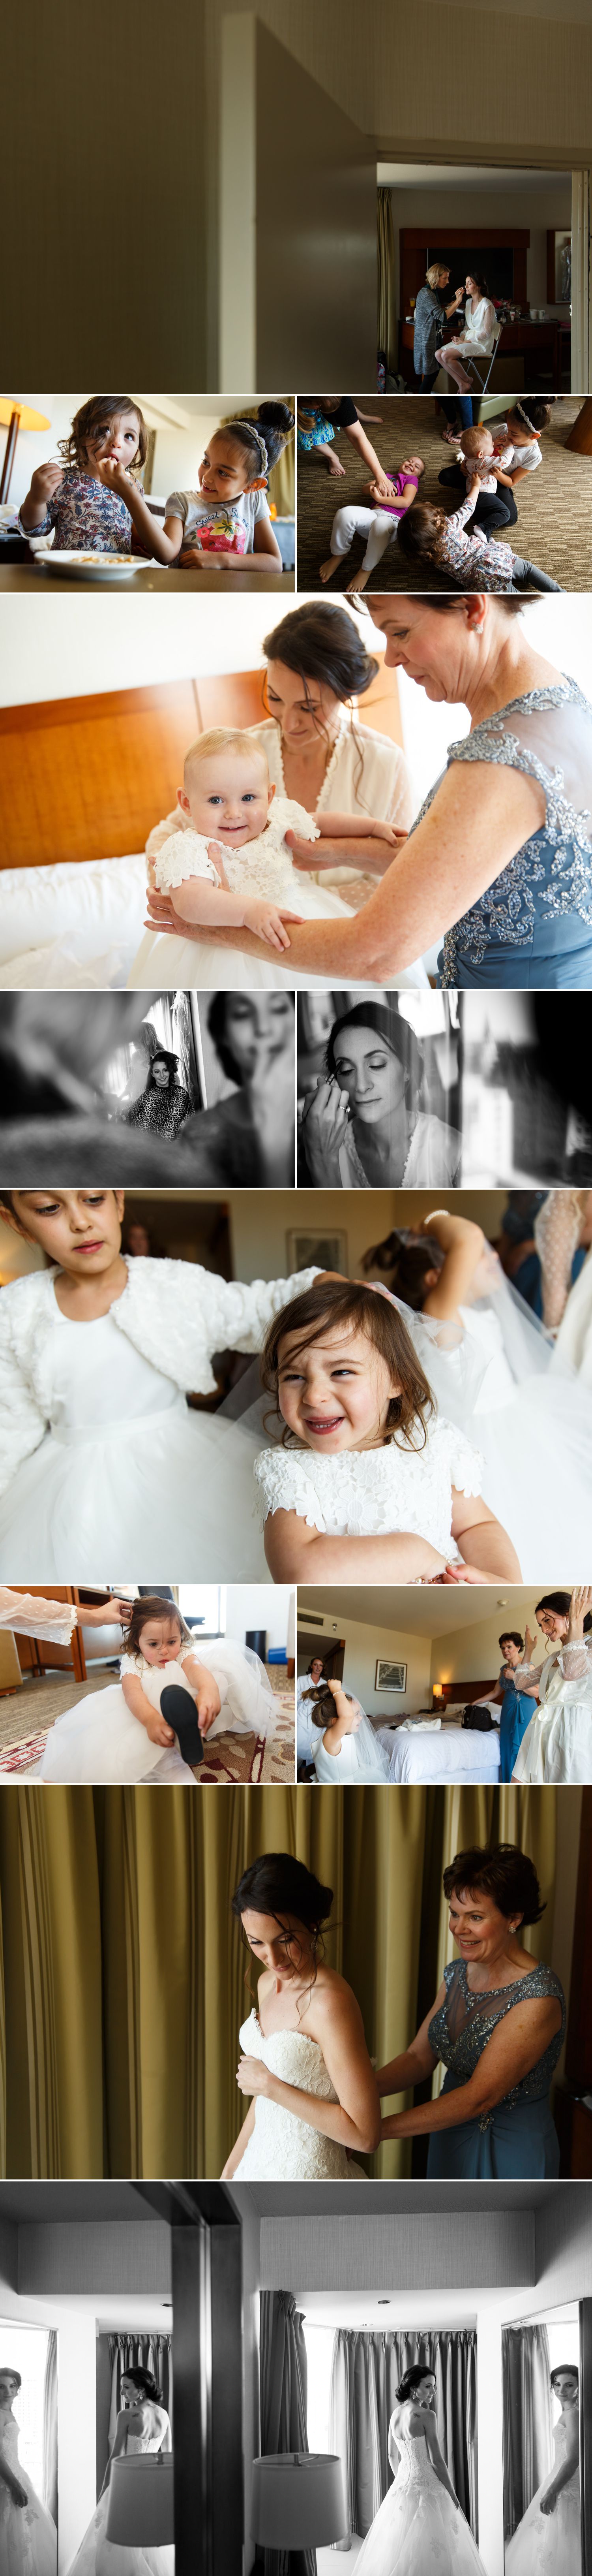 Photographs of a bride getting ready on her wedding day at the Westin hotel in Ottawa